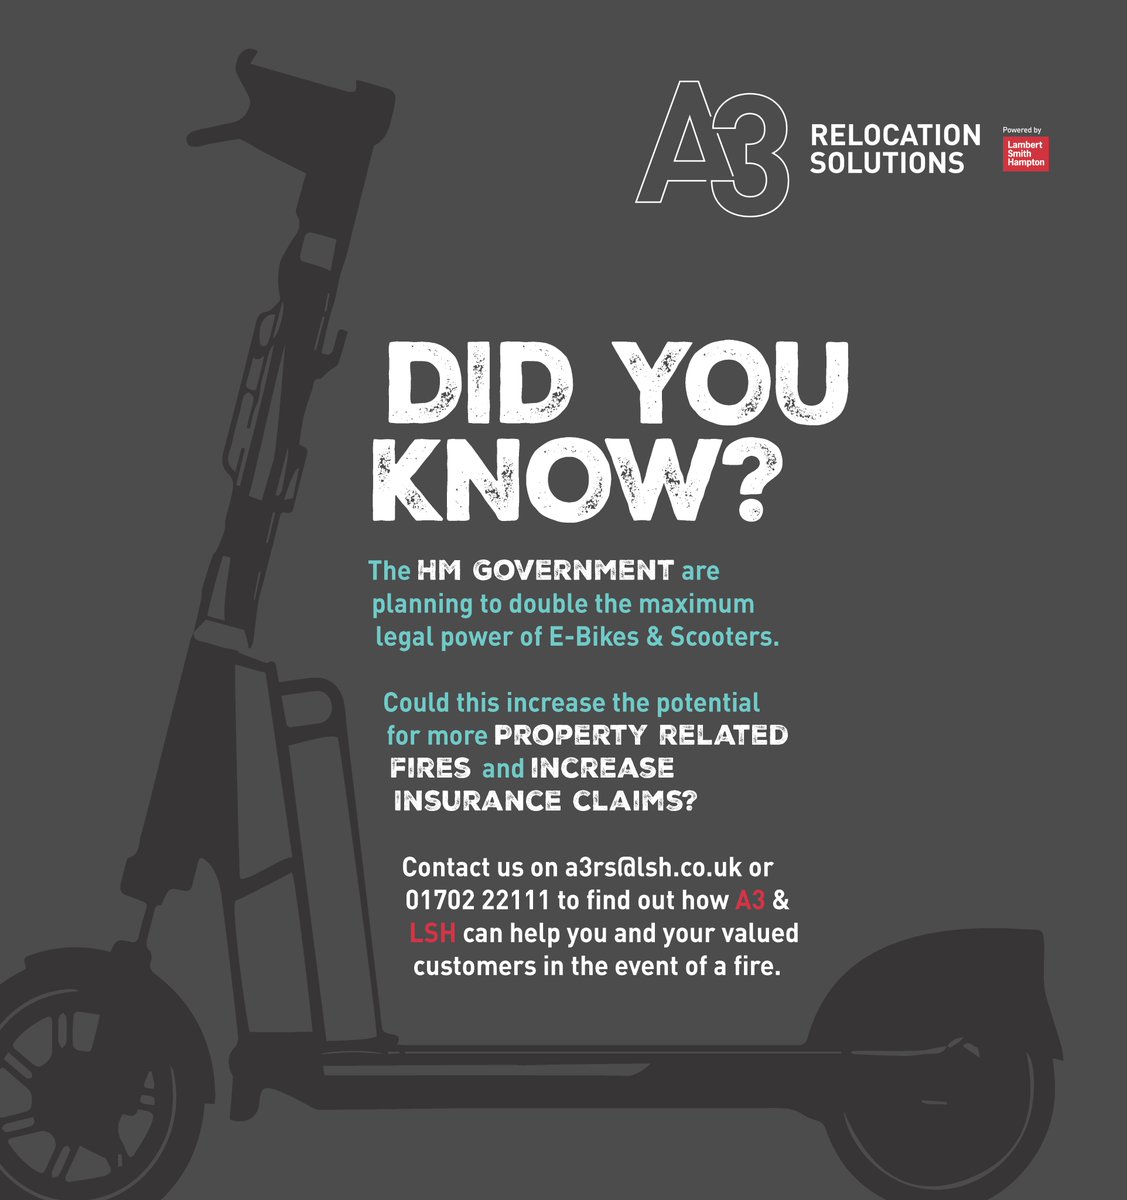 According to the London Fire Brigade website, E Scooter and E Bikes are becoming an ever-growing fire risk in the capital. Contact #A3Relocation at a3rs@lsh.co.uk to find out how we can help you to mitigate these risks in your building. #EScooter #InsuranceClaims